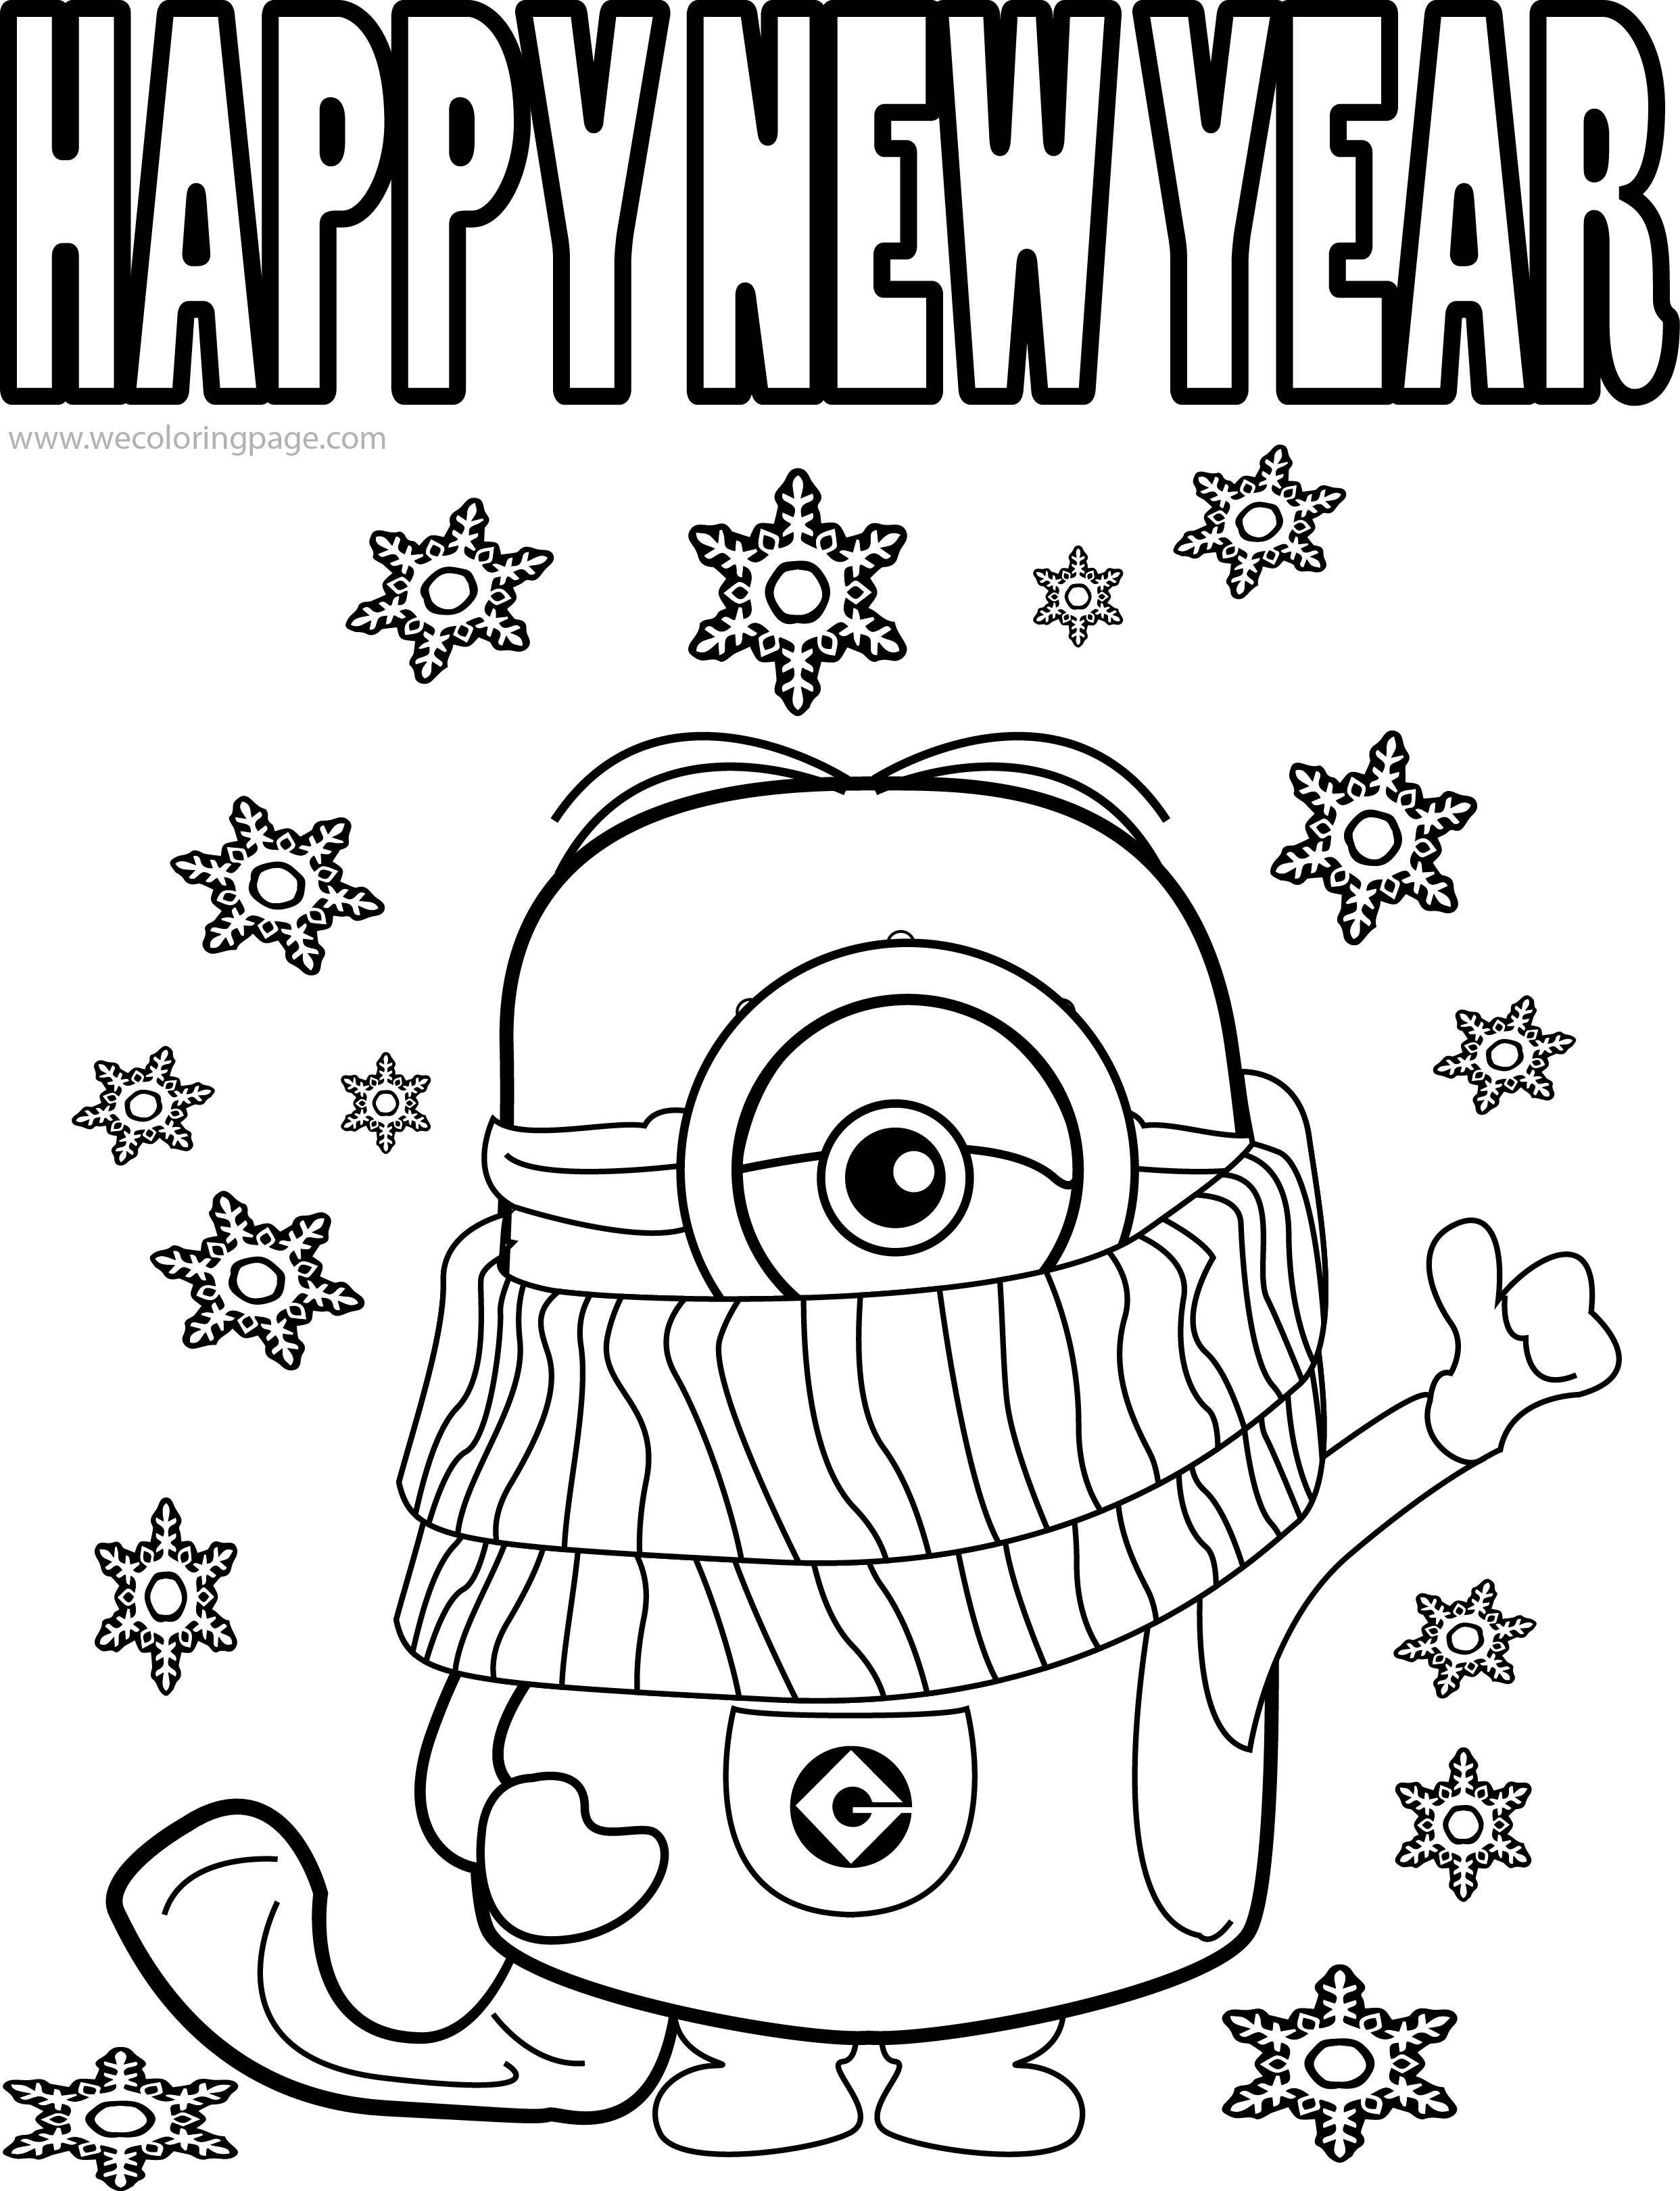 Happy New Year Coloring Pages Preschool